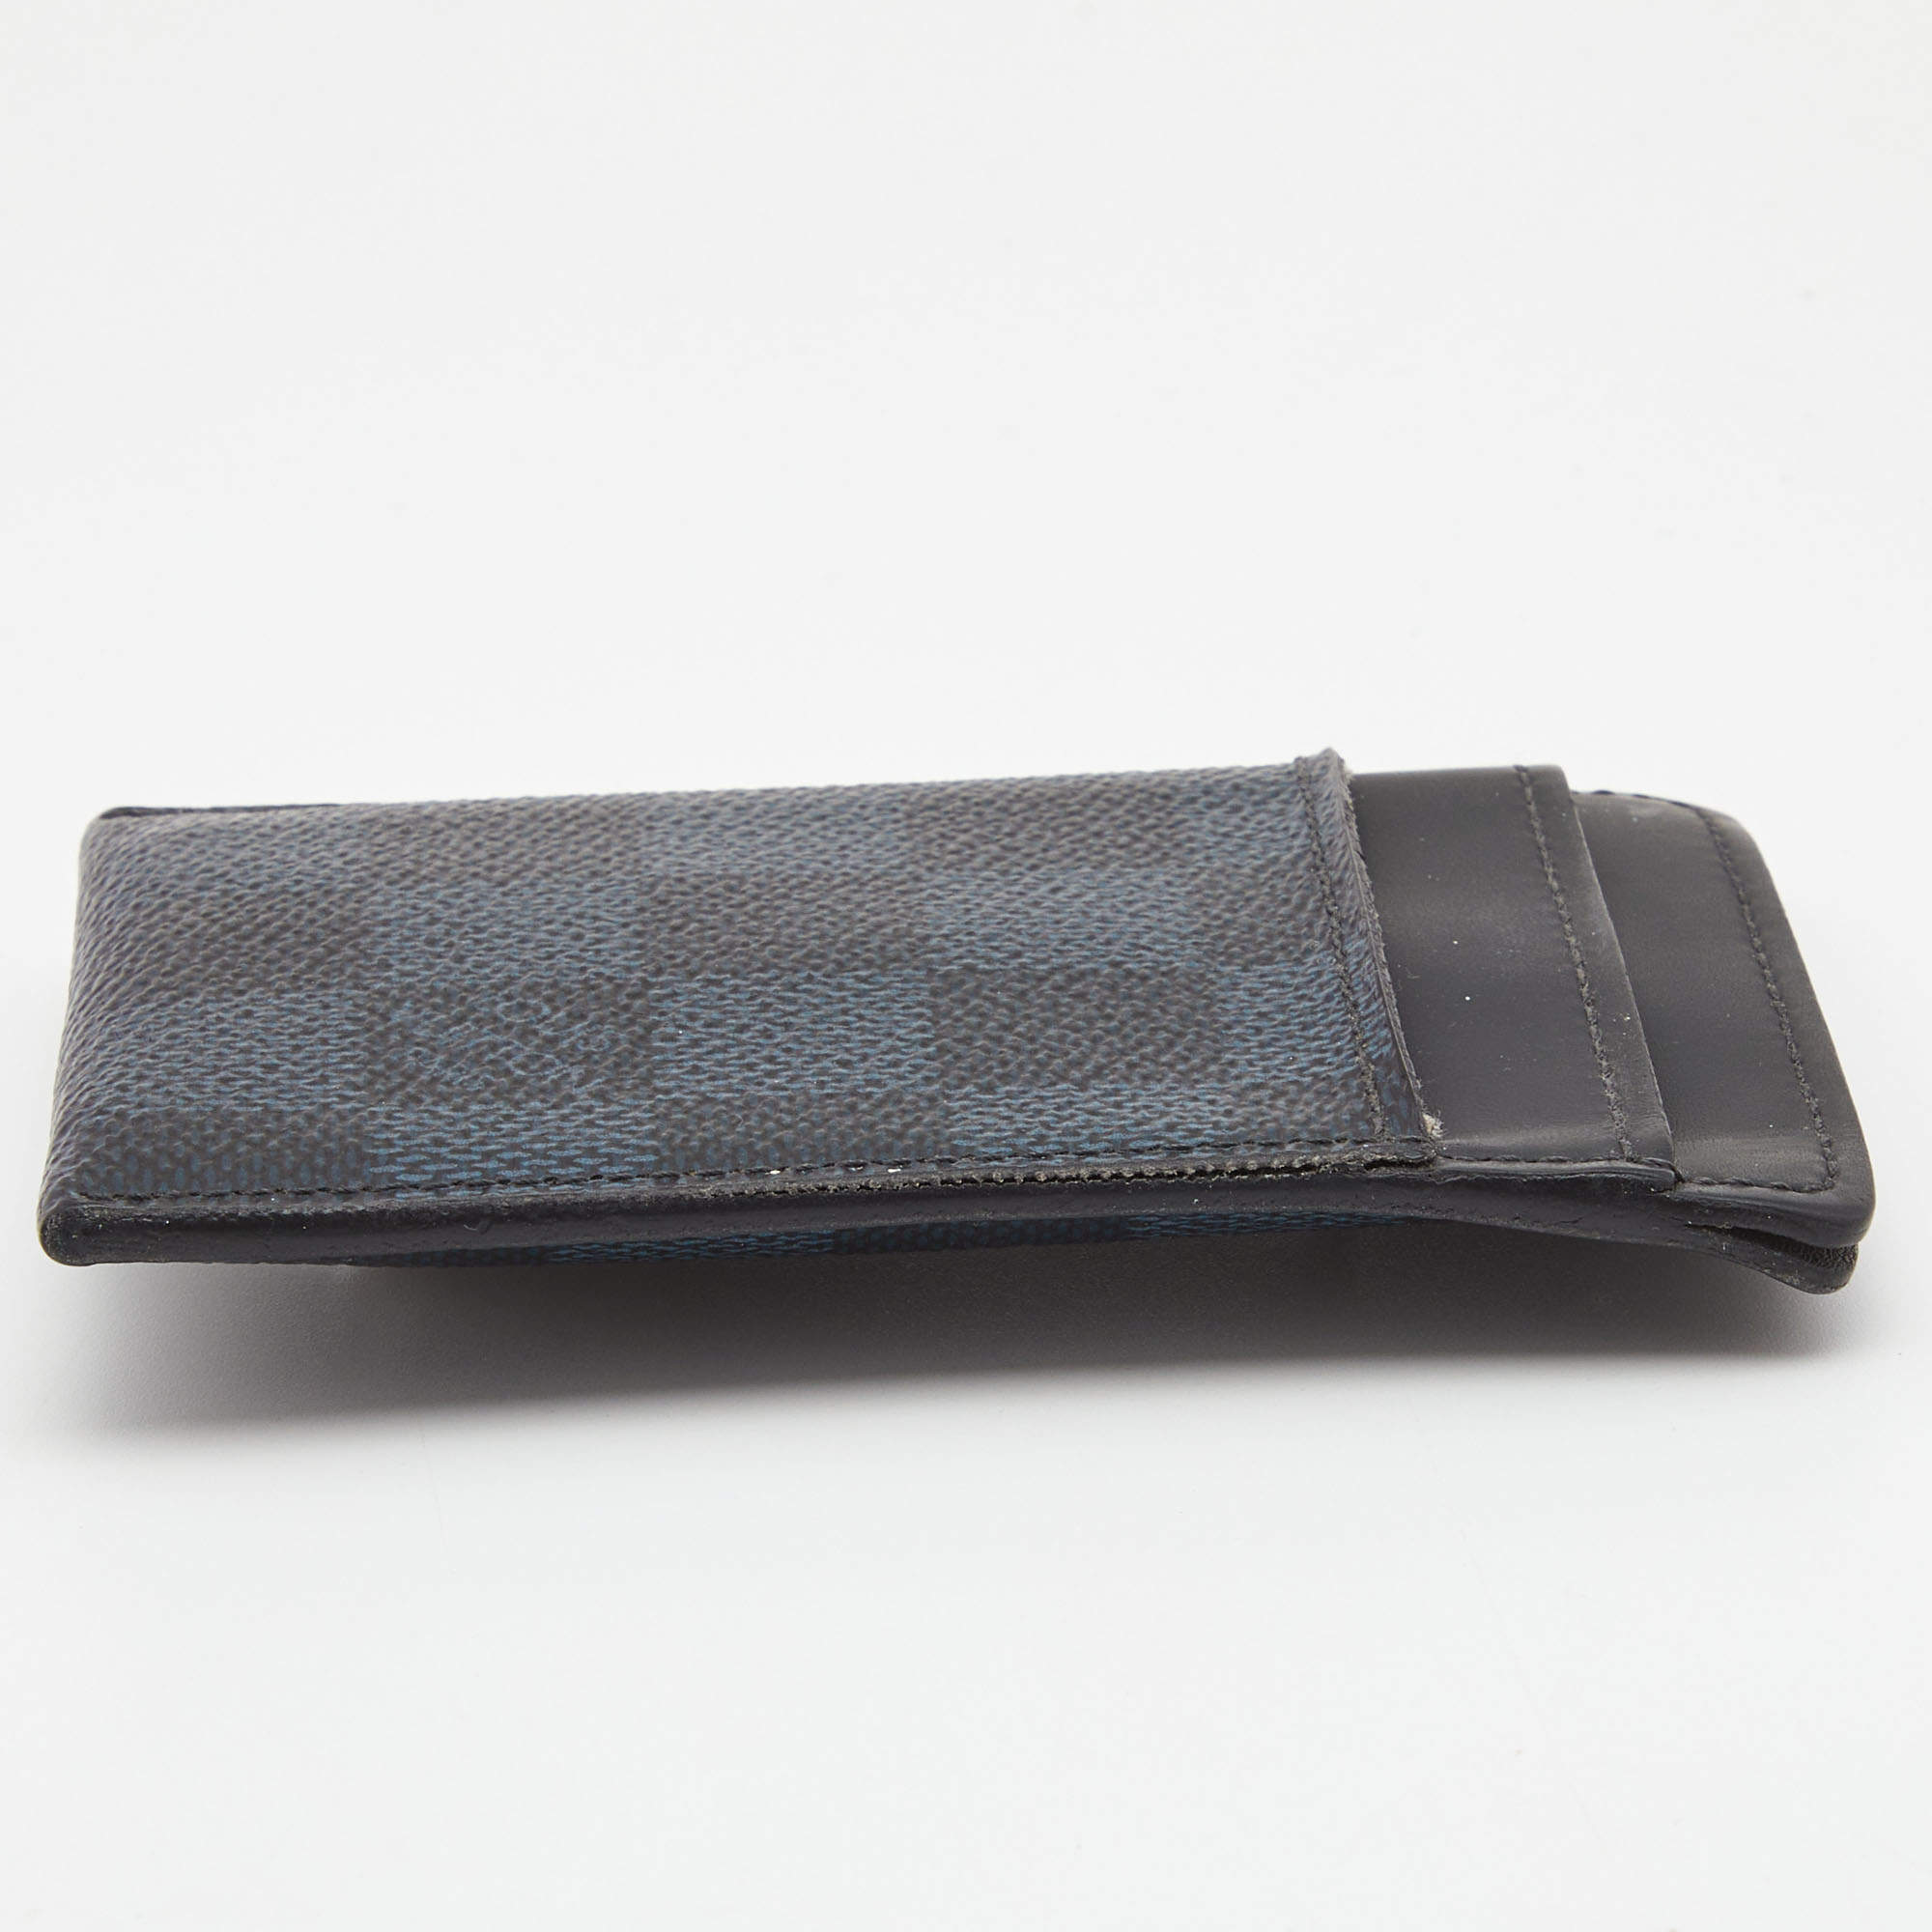 Card Holder Pince Damier Graphite Canvas - Wallets and Small Leather Goods  N60246